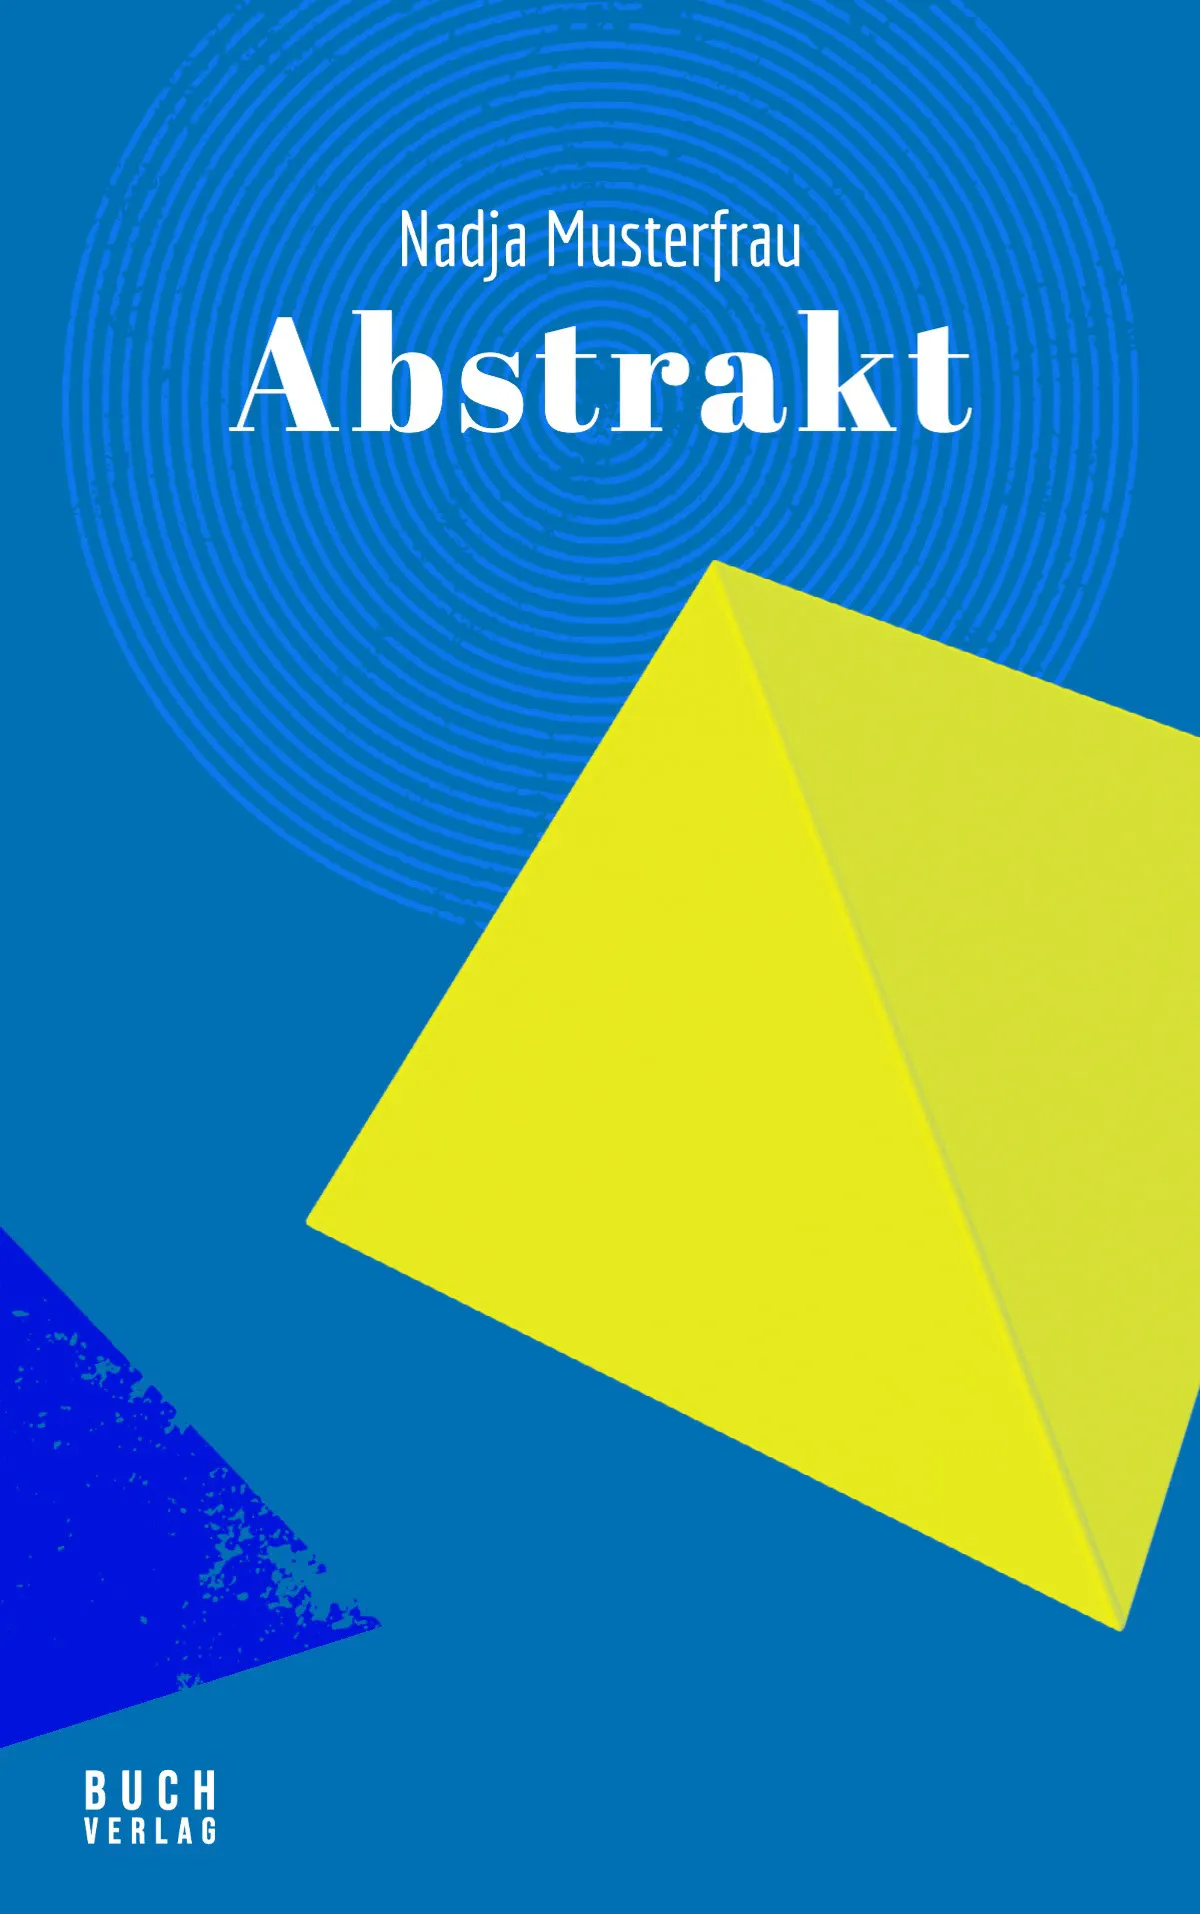 Blue Yellow Abstract Geometric Form Book Cover